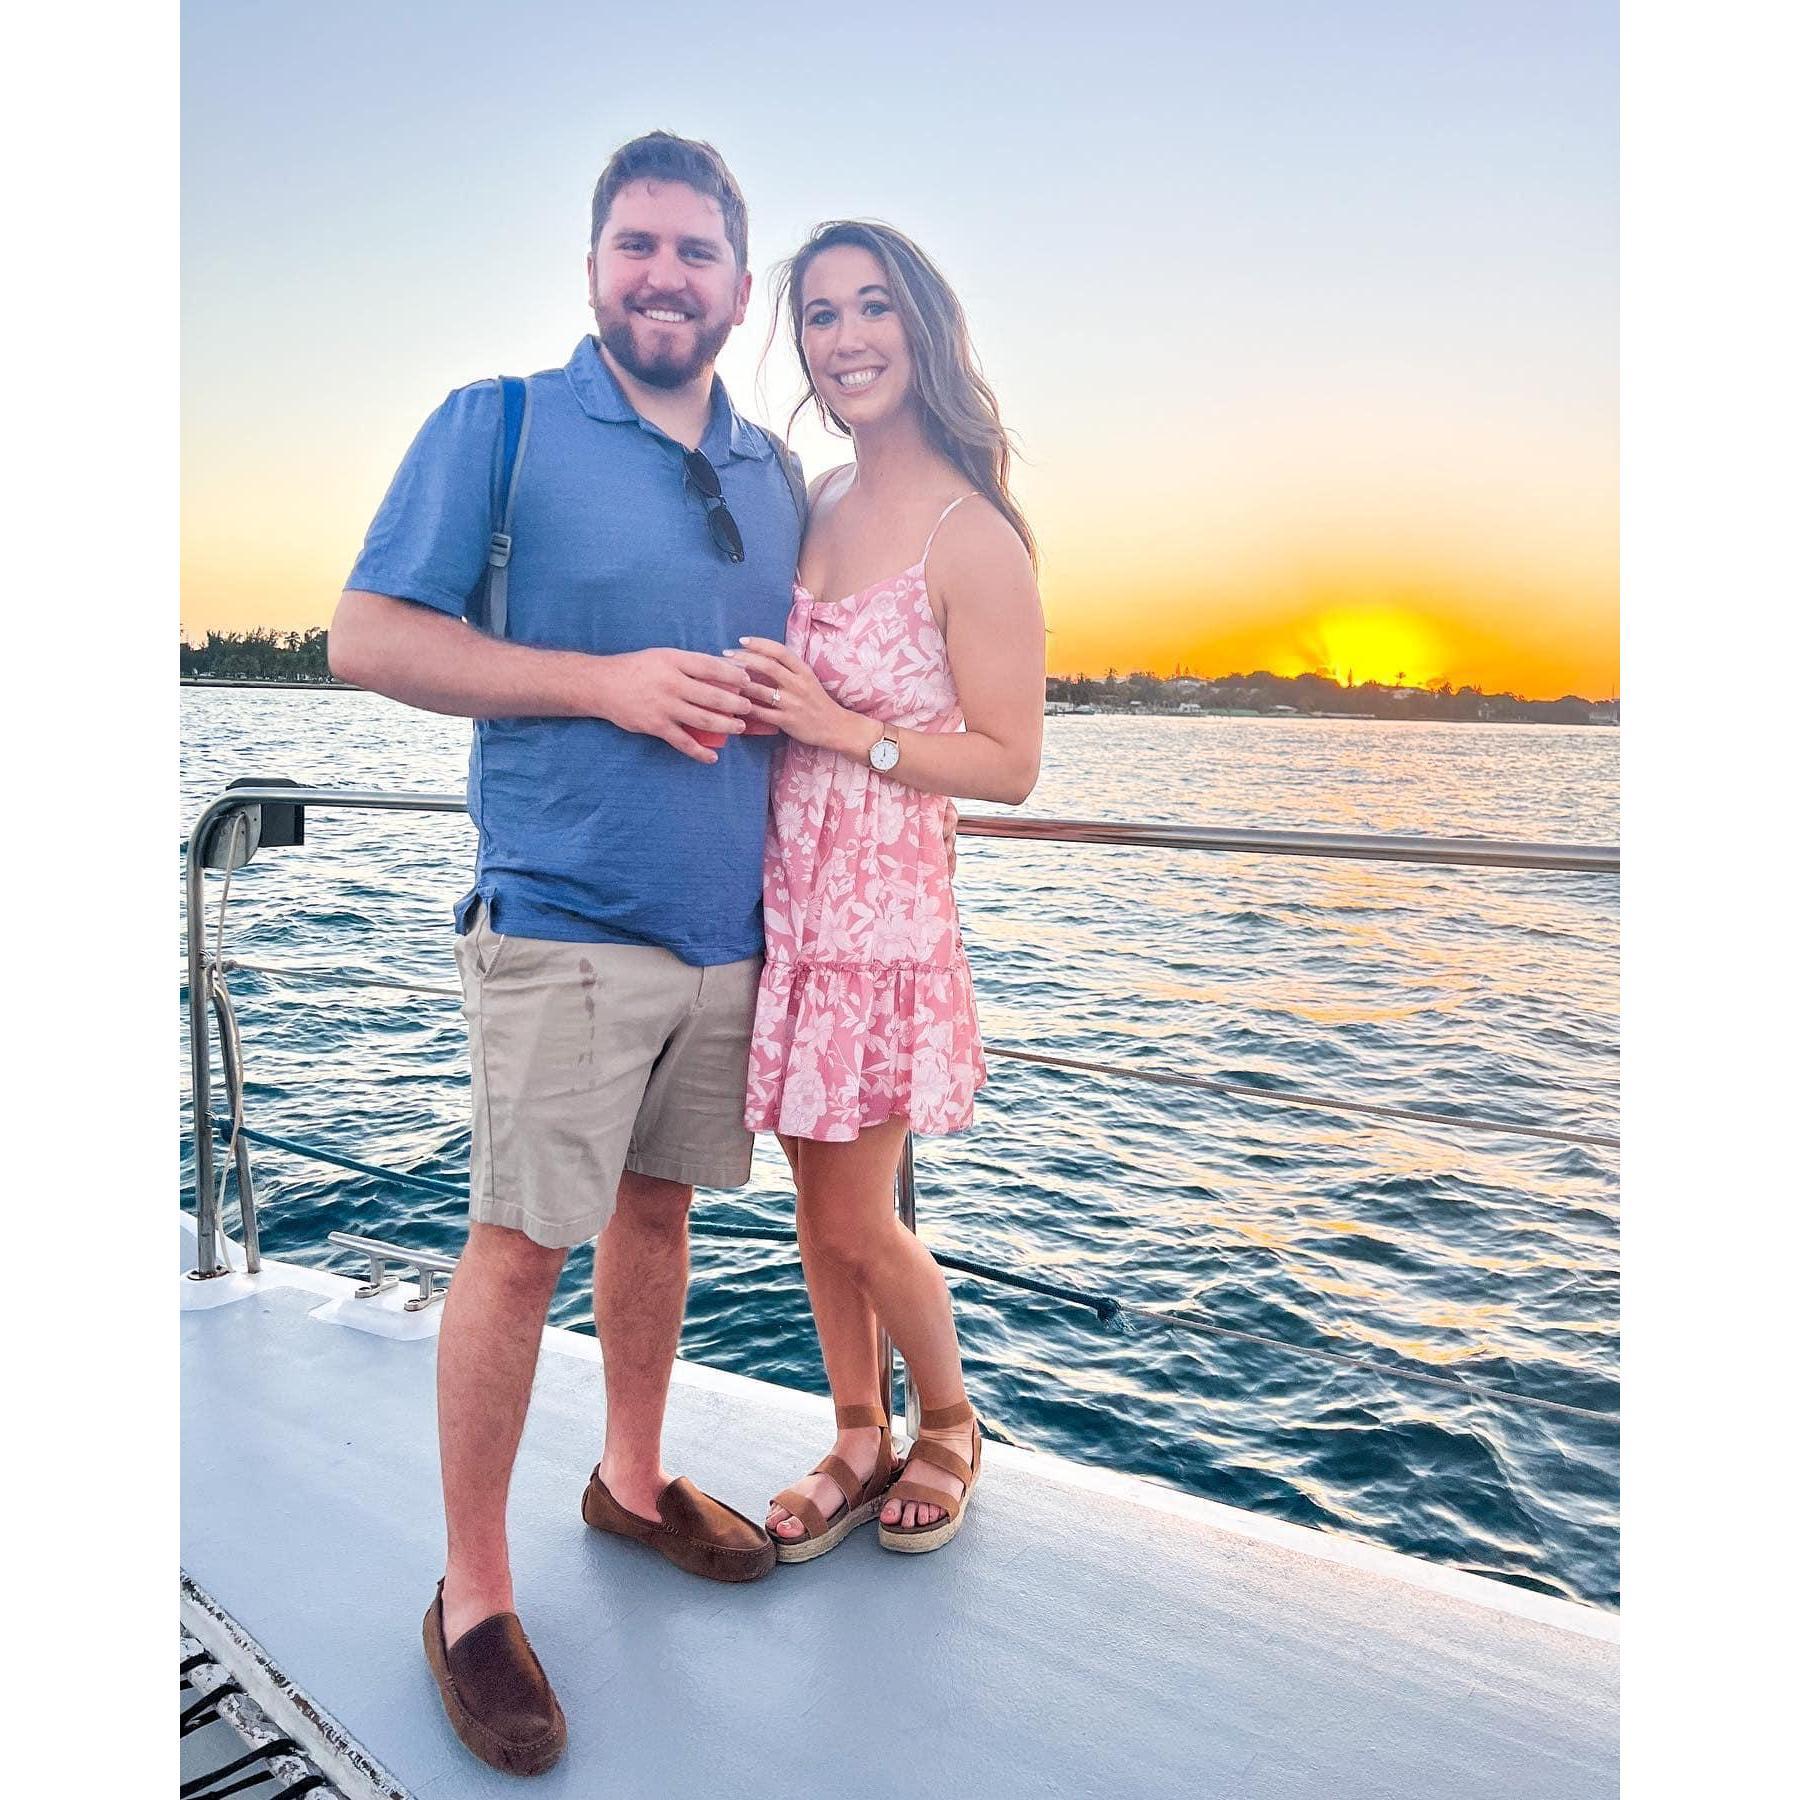 Sunset Cruise the day after we got engaged!